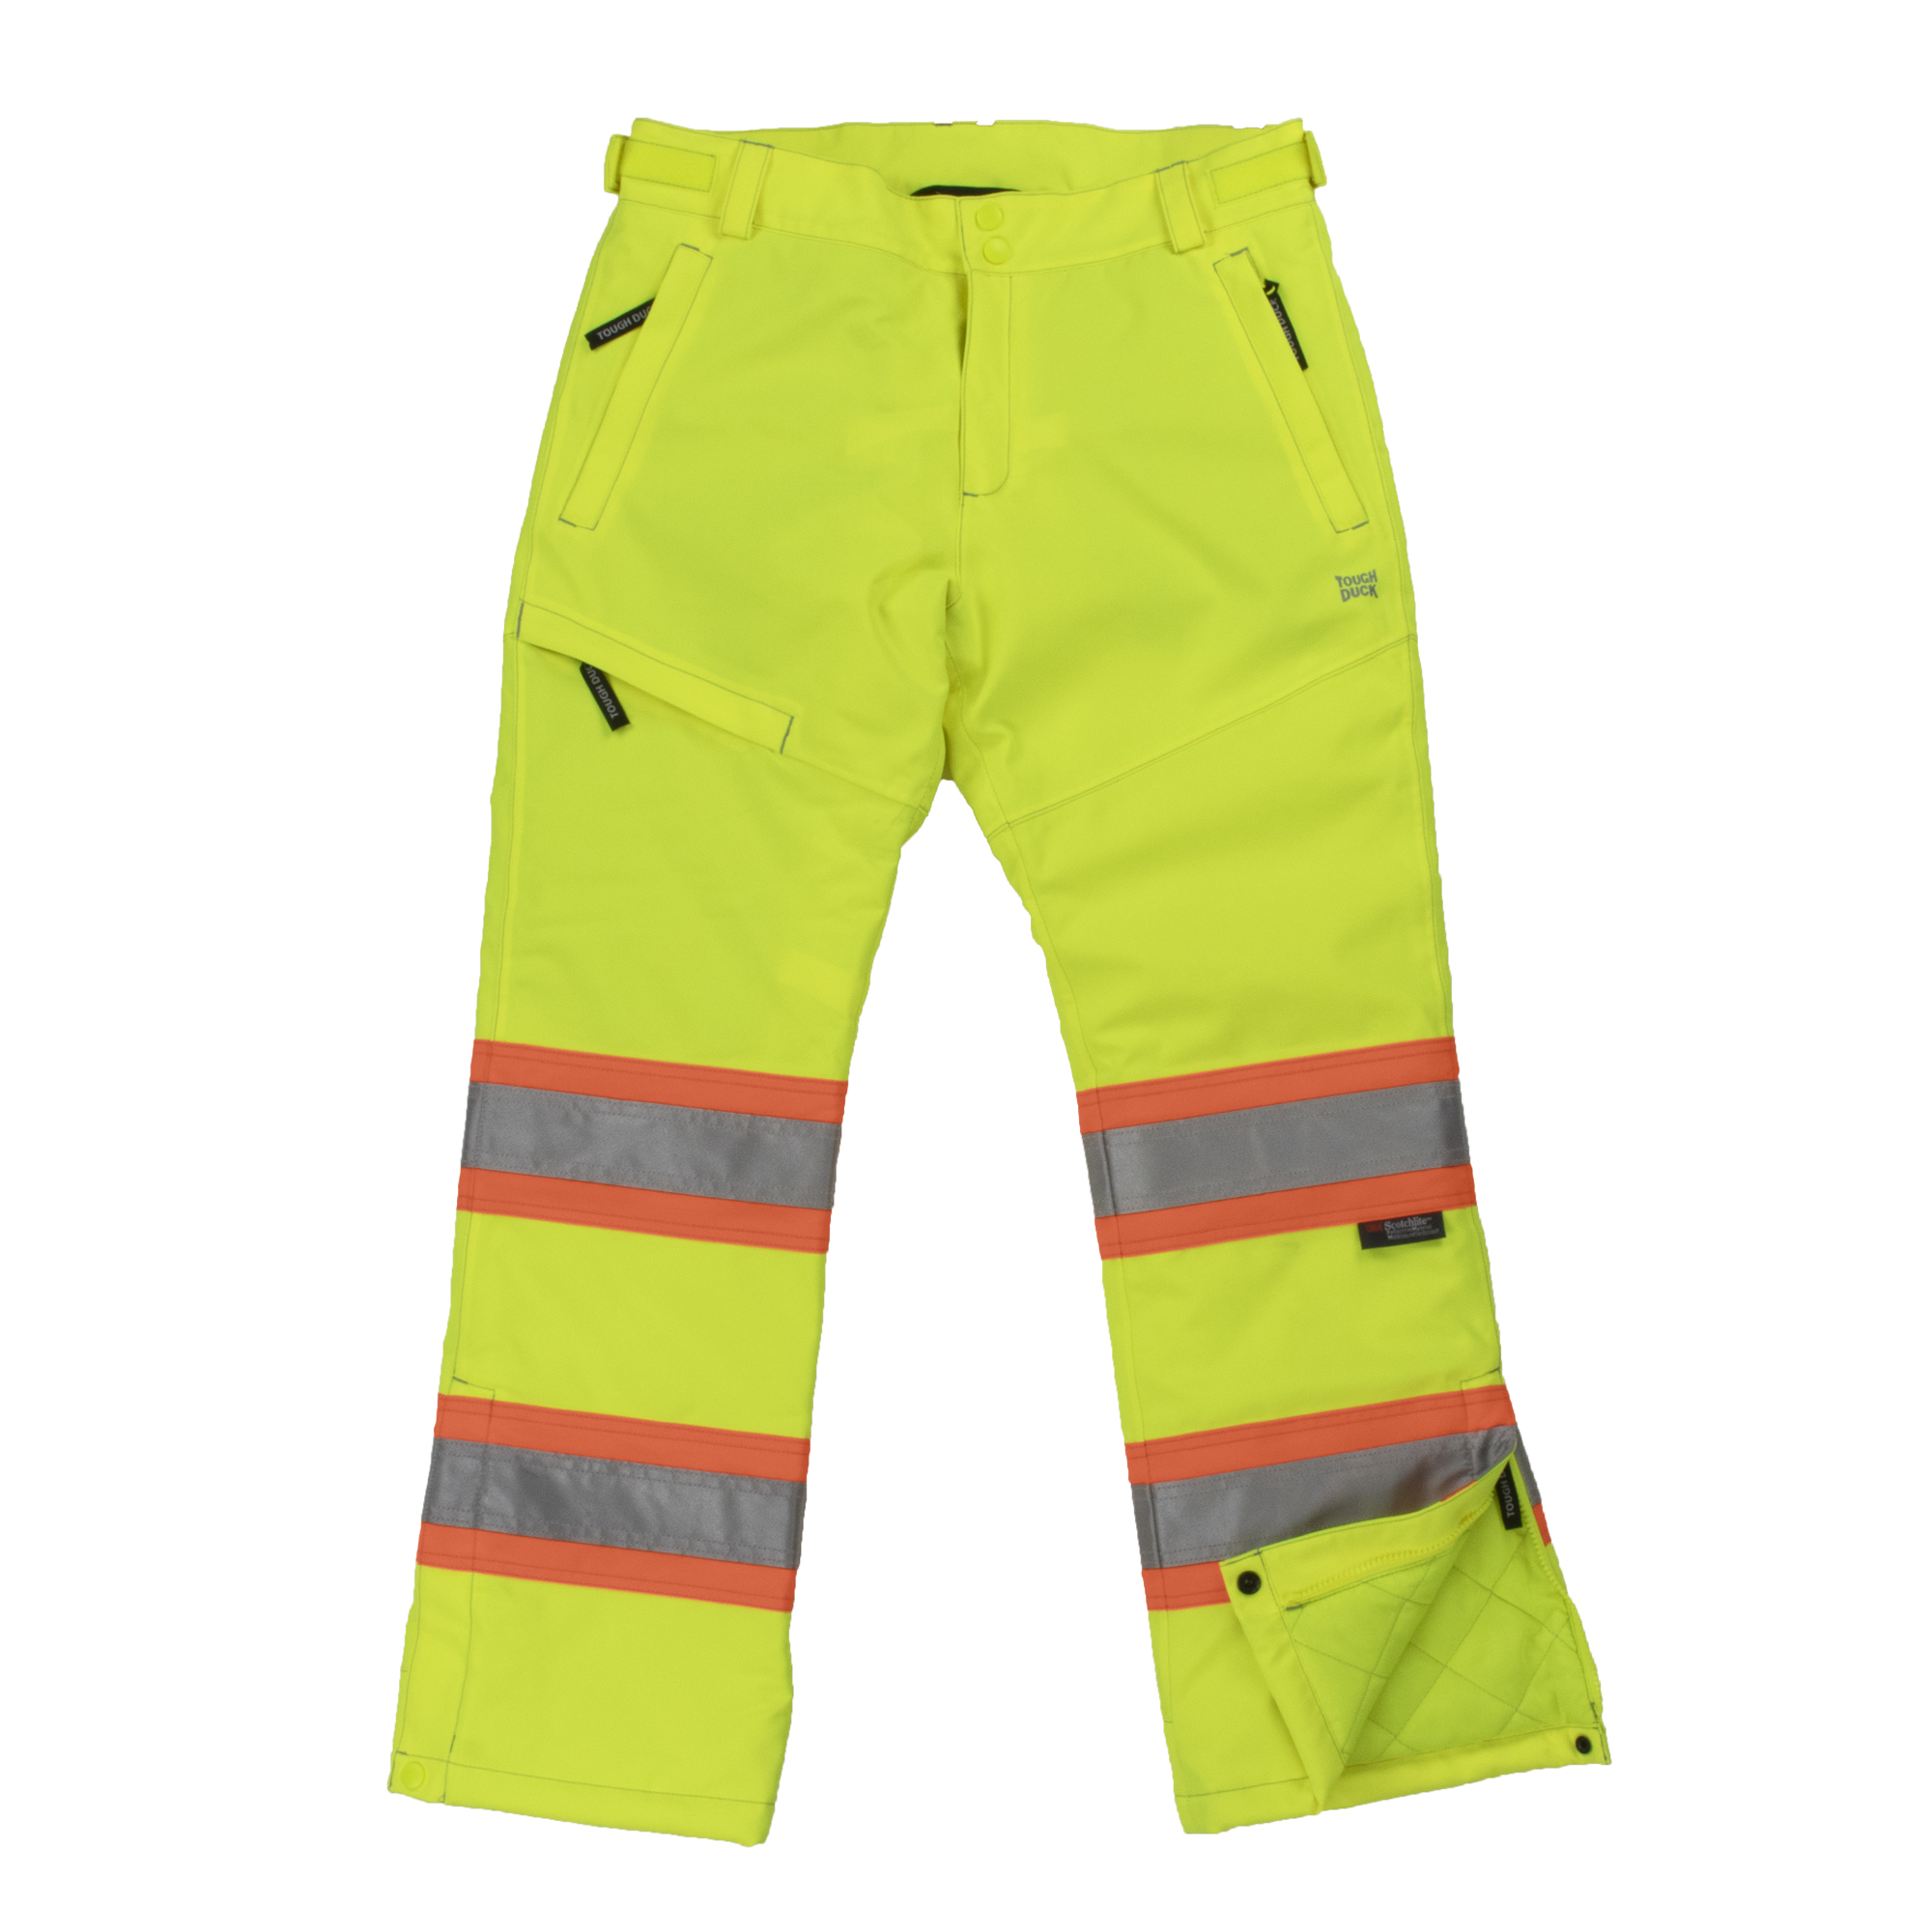 Women's Insulated Yellow Safety Pants